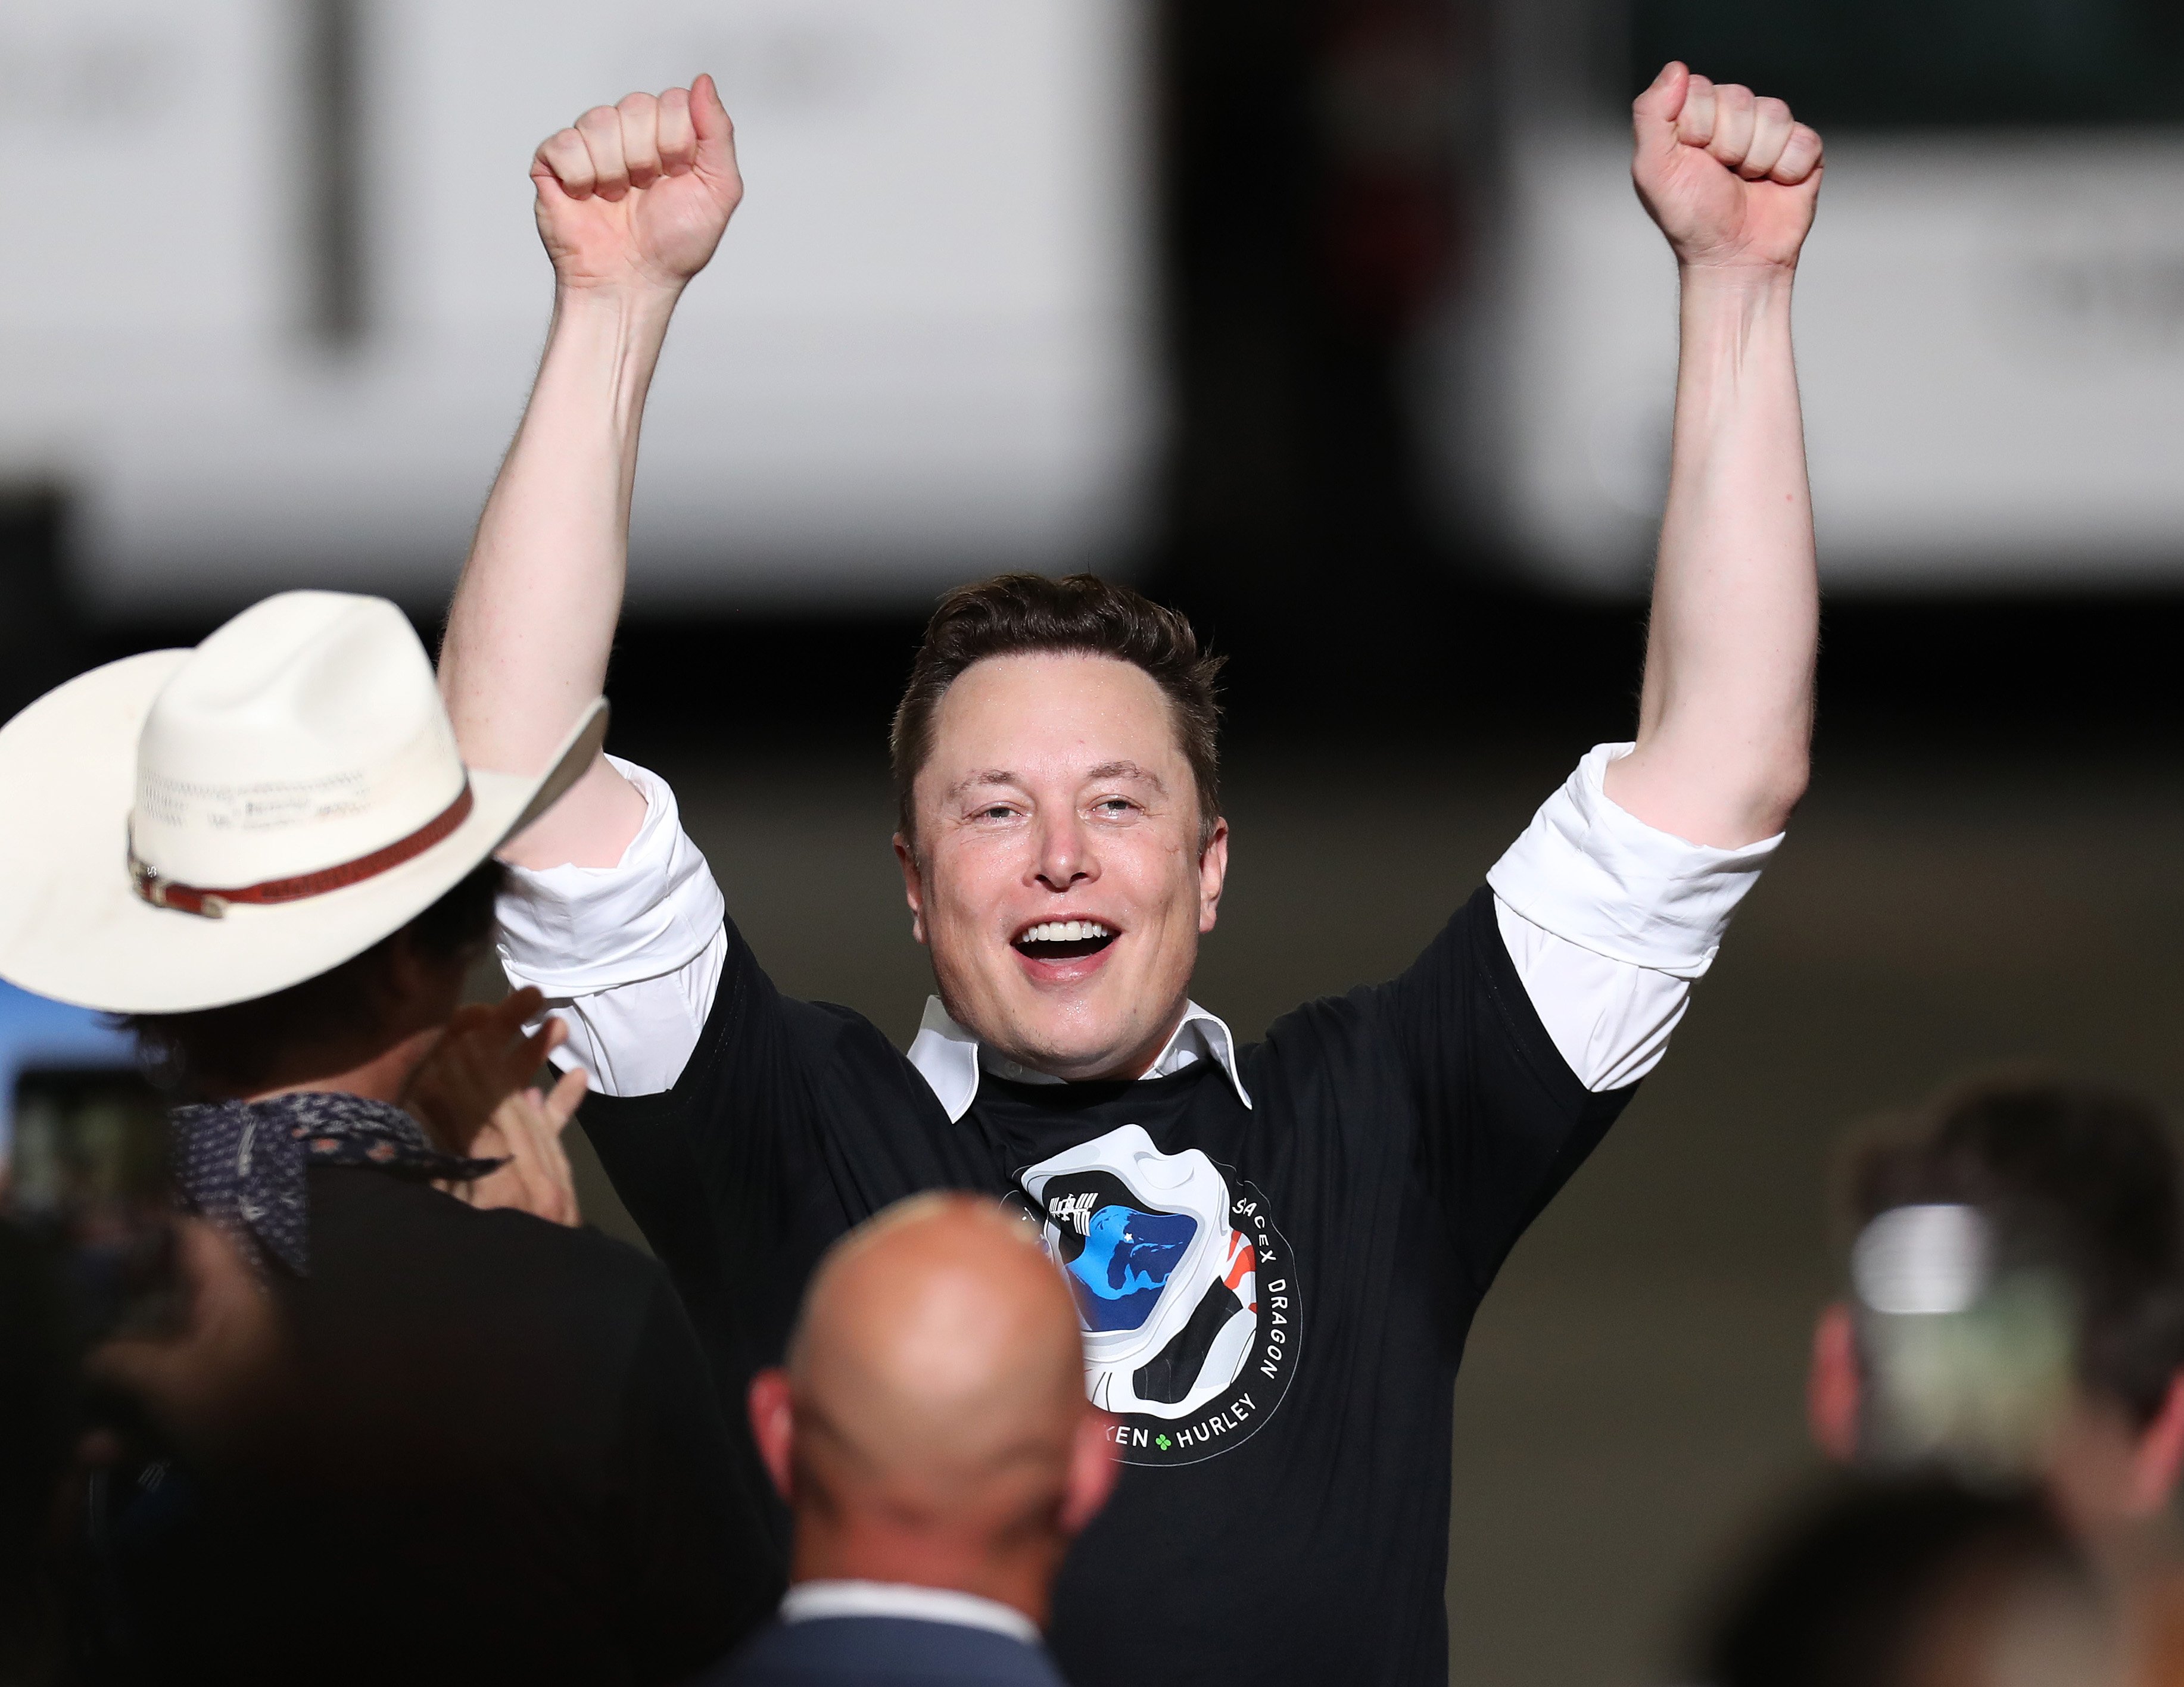 Elon Musk celebrates after the successful launch of the SpaceX Falcon 9 rocket with the manned Crew Dragon spacecraft at the Kennedy Space Center on May 30, 2020, in Cape Canaveral, Florida. | Source: Getty Images